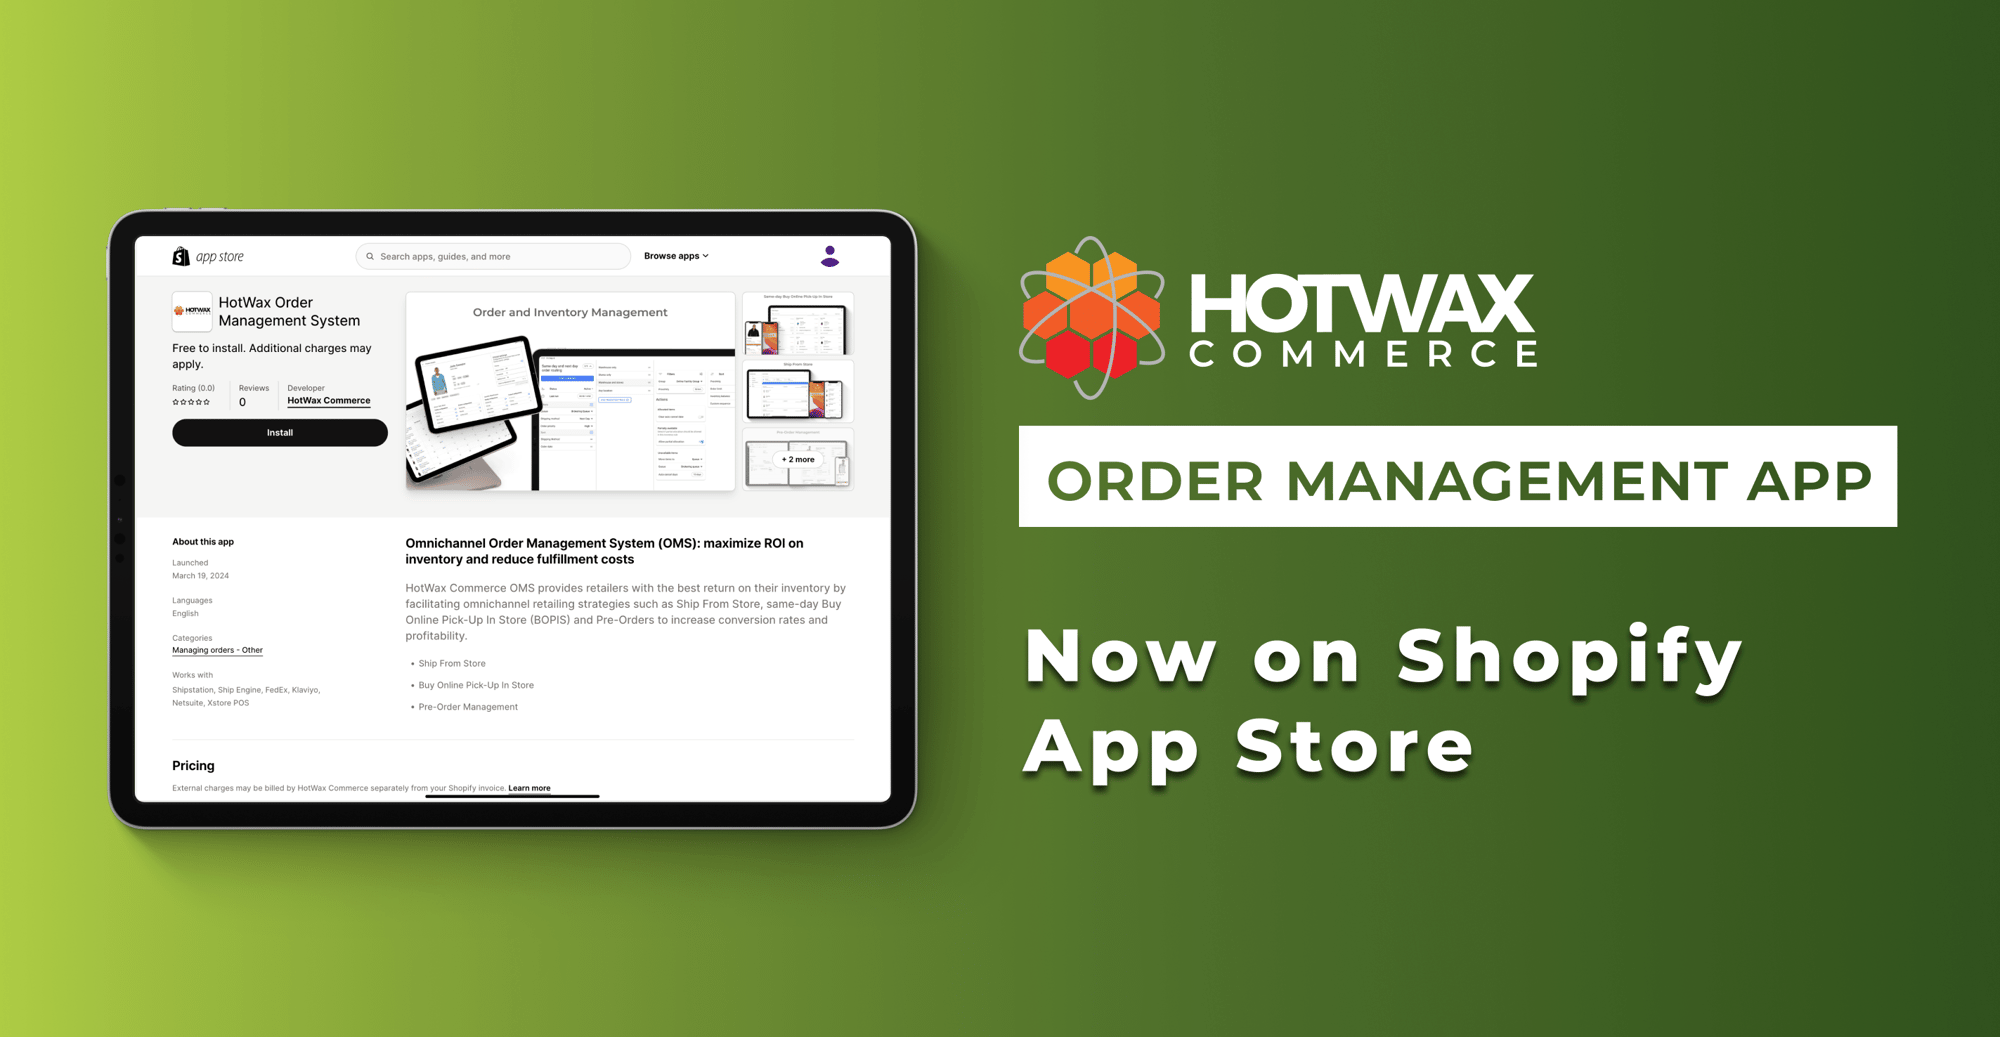 HotWax Commerce Order Management App Now On Shopify App Store